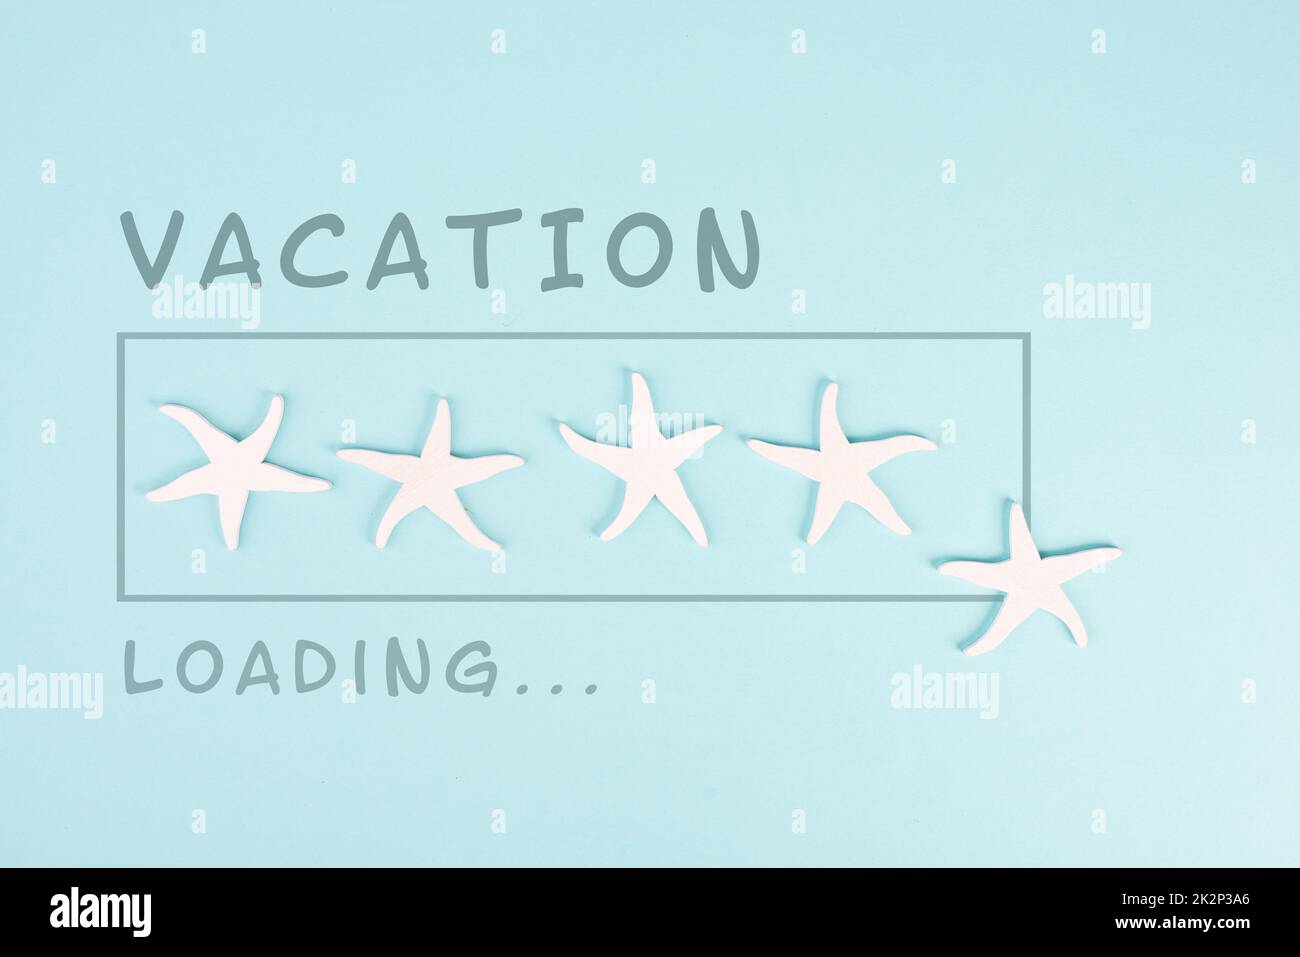 Progress bar with sea stars, vacation loading ist standing on the paper, planning a trip for the weekend, holiday and travel concept Stock Photo